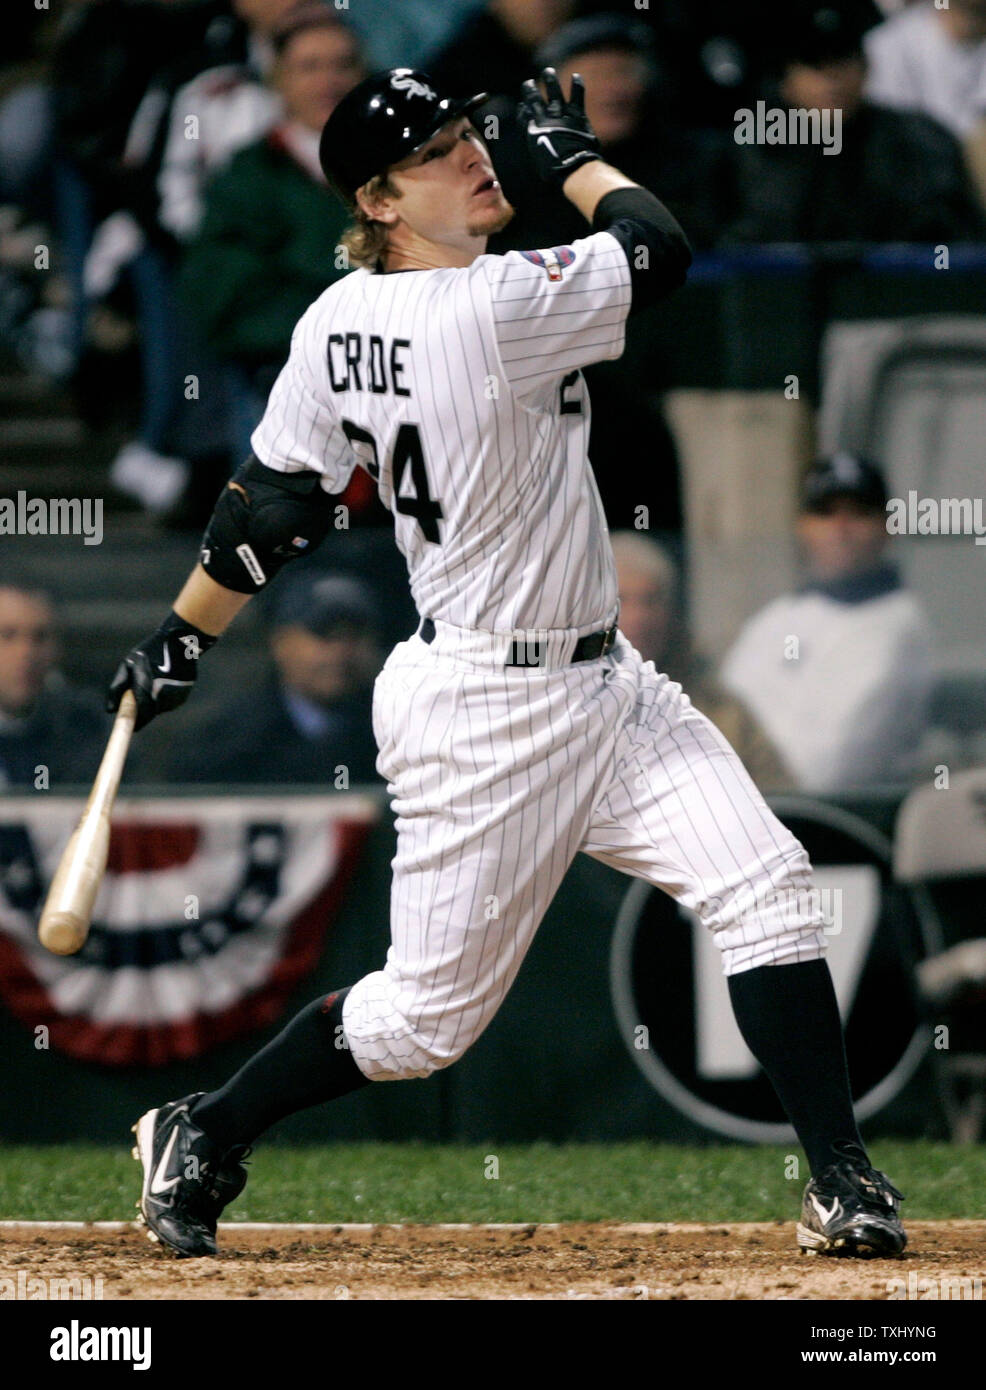 Chicago White Sox third baseman Joe Crede (24) yells as he watches a long  drive curve foul during game 2 of the World Series at U. S. Cellular Field,  October 23, 2005